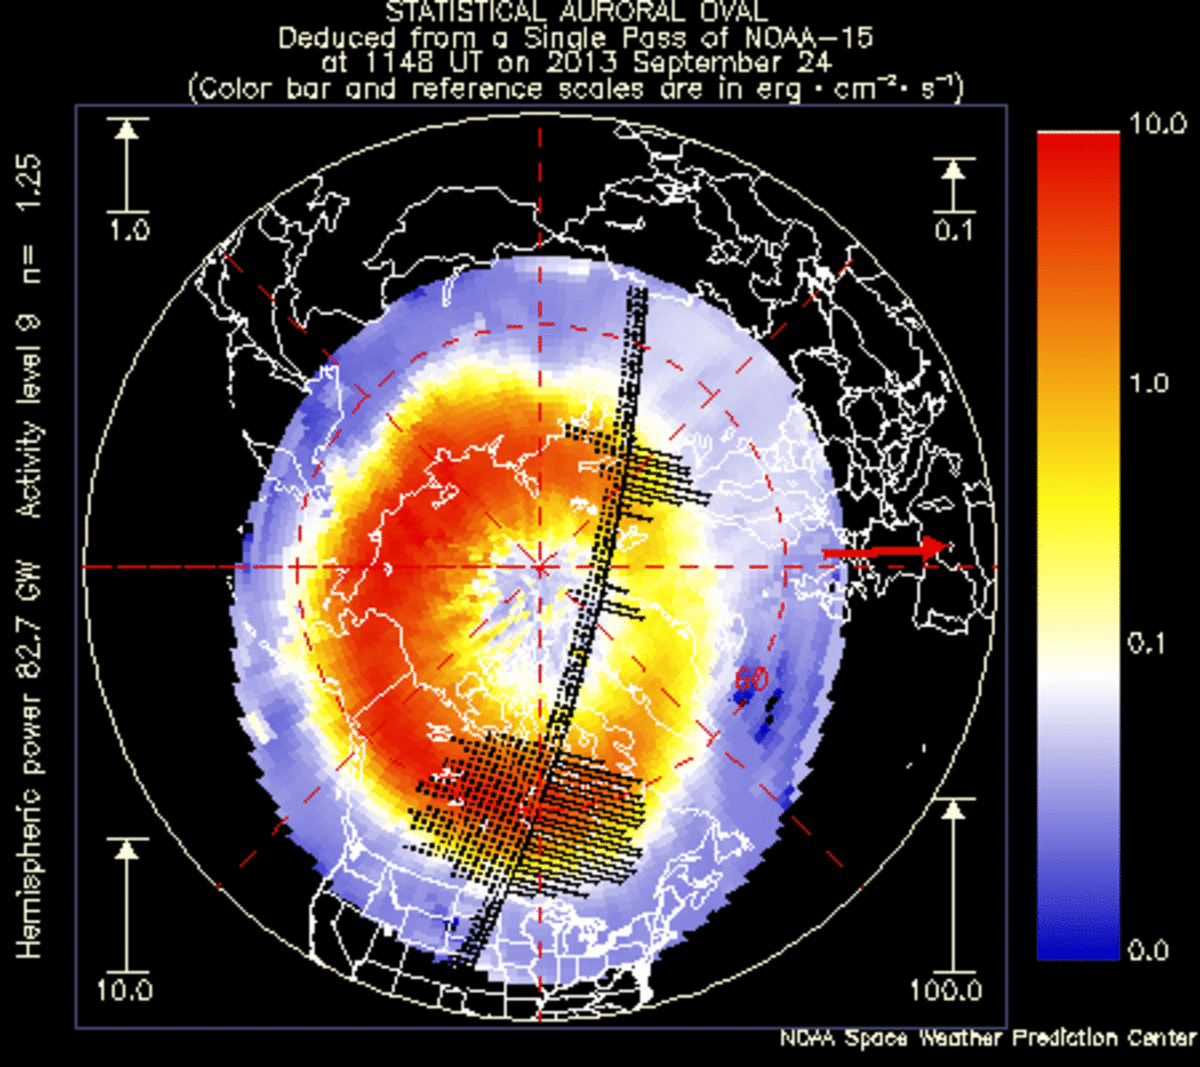 The blue area of the oval shows how far south the Northern Lights were viewed on September 24, 2013.